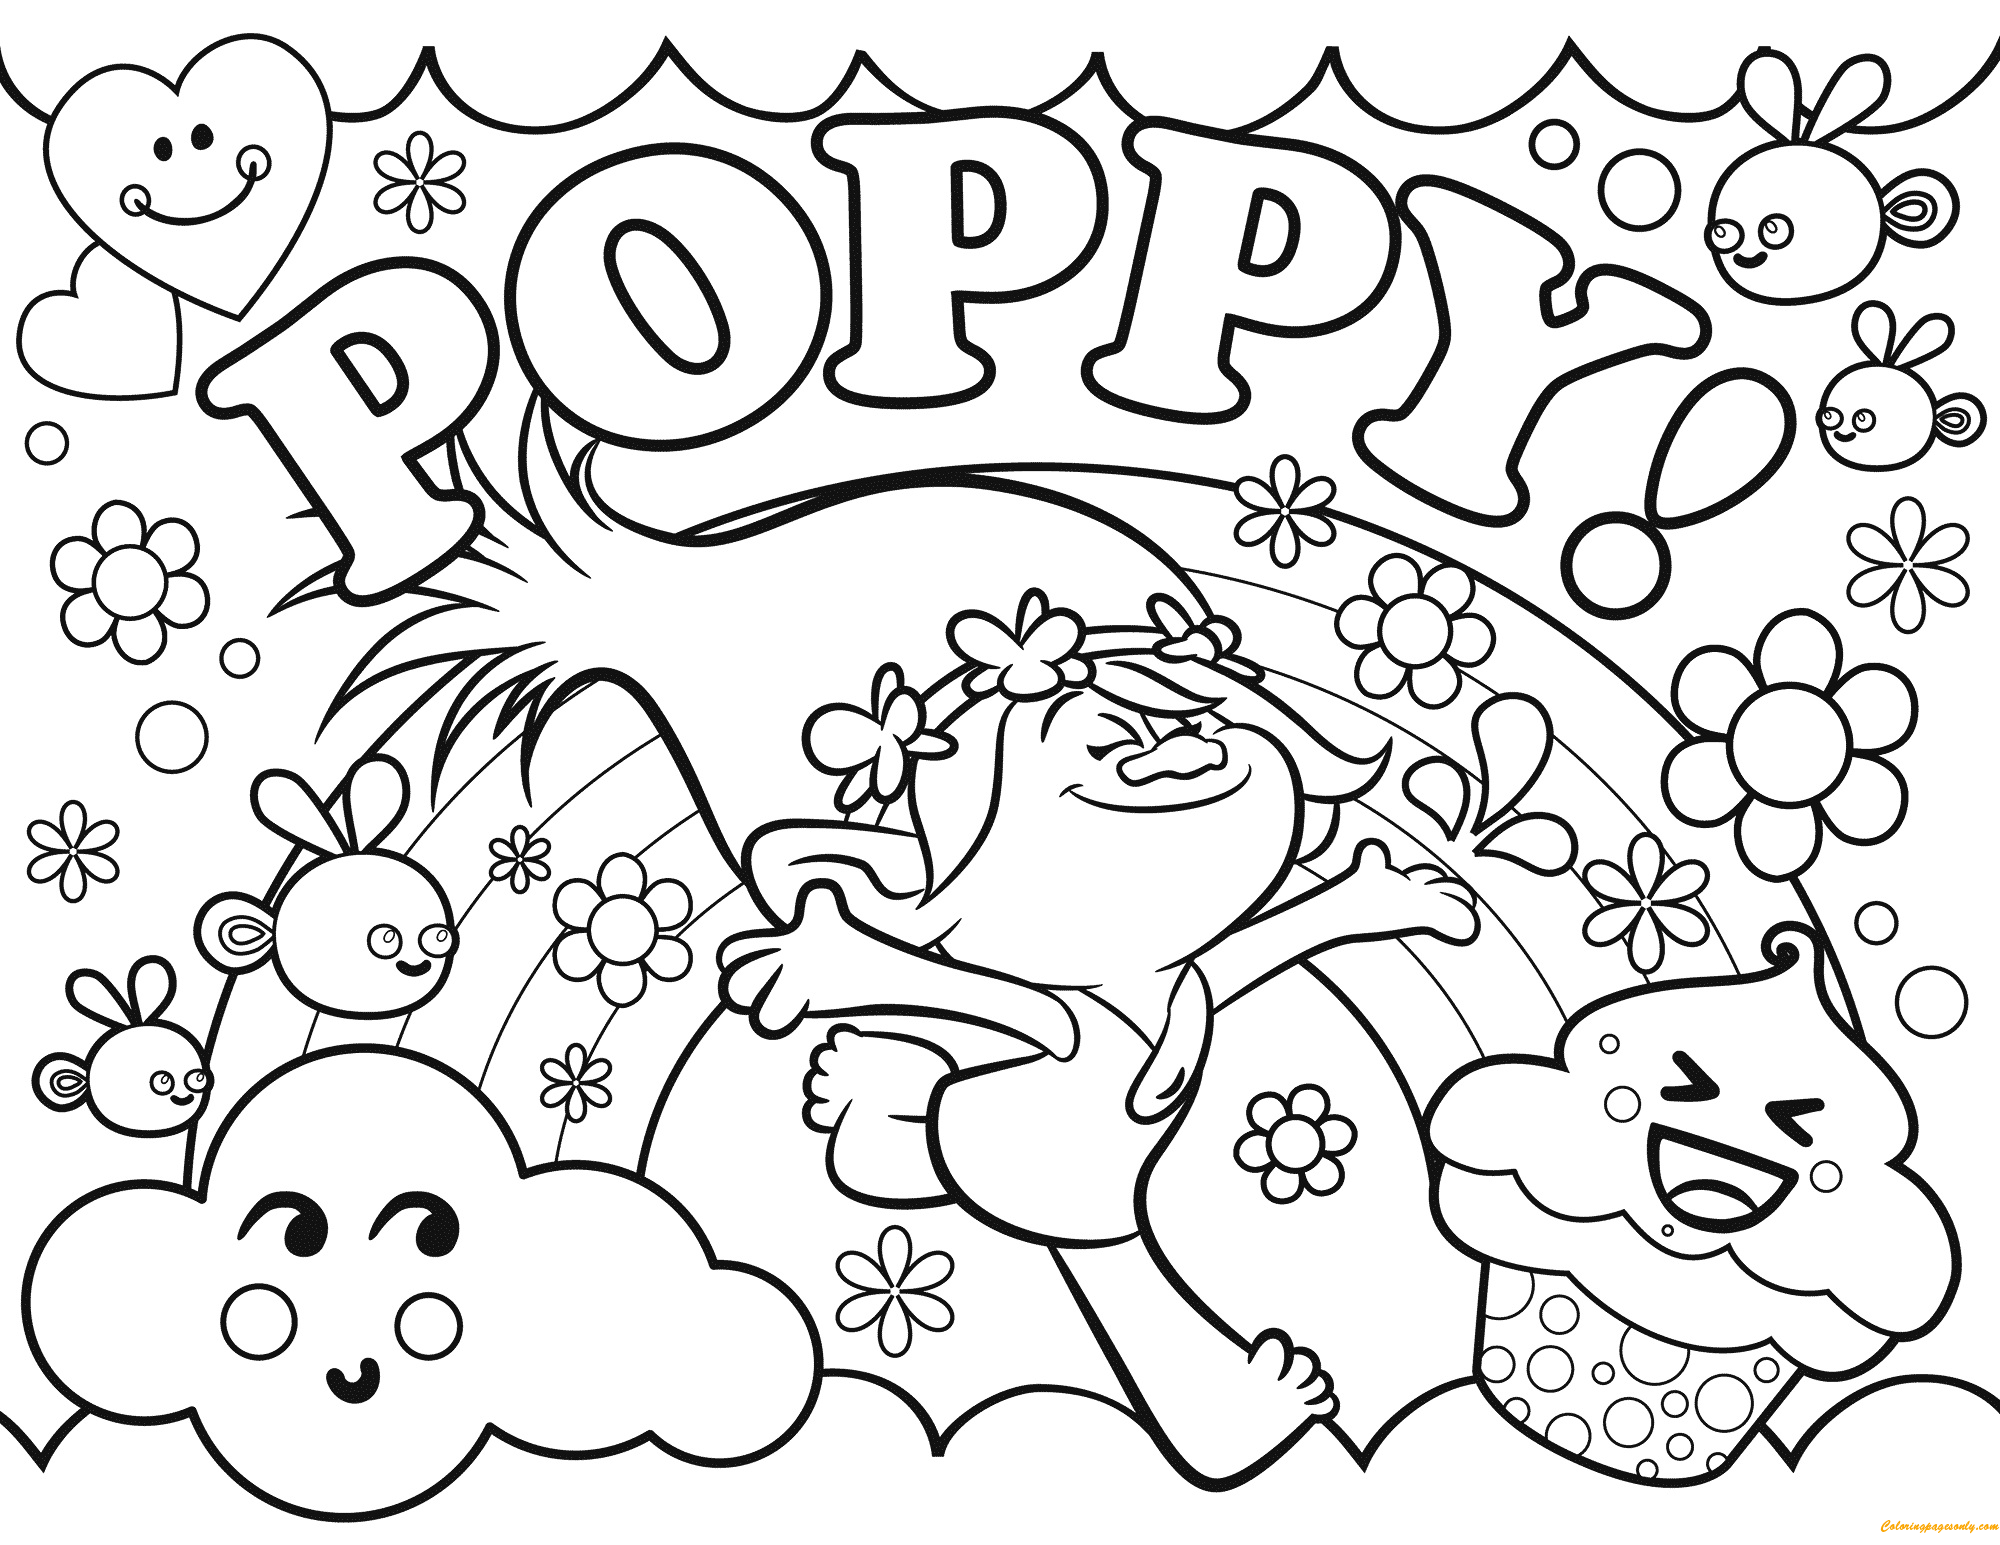 Trolls Poppy Coloring Pages